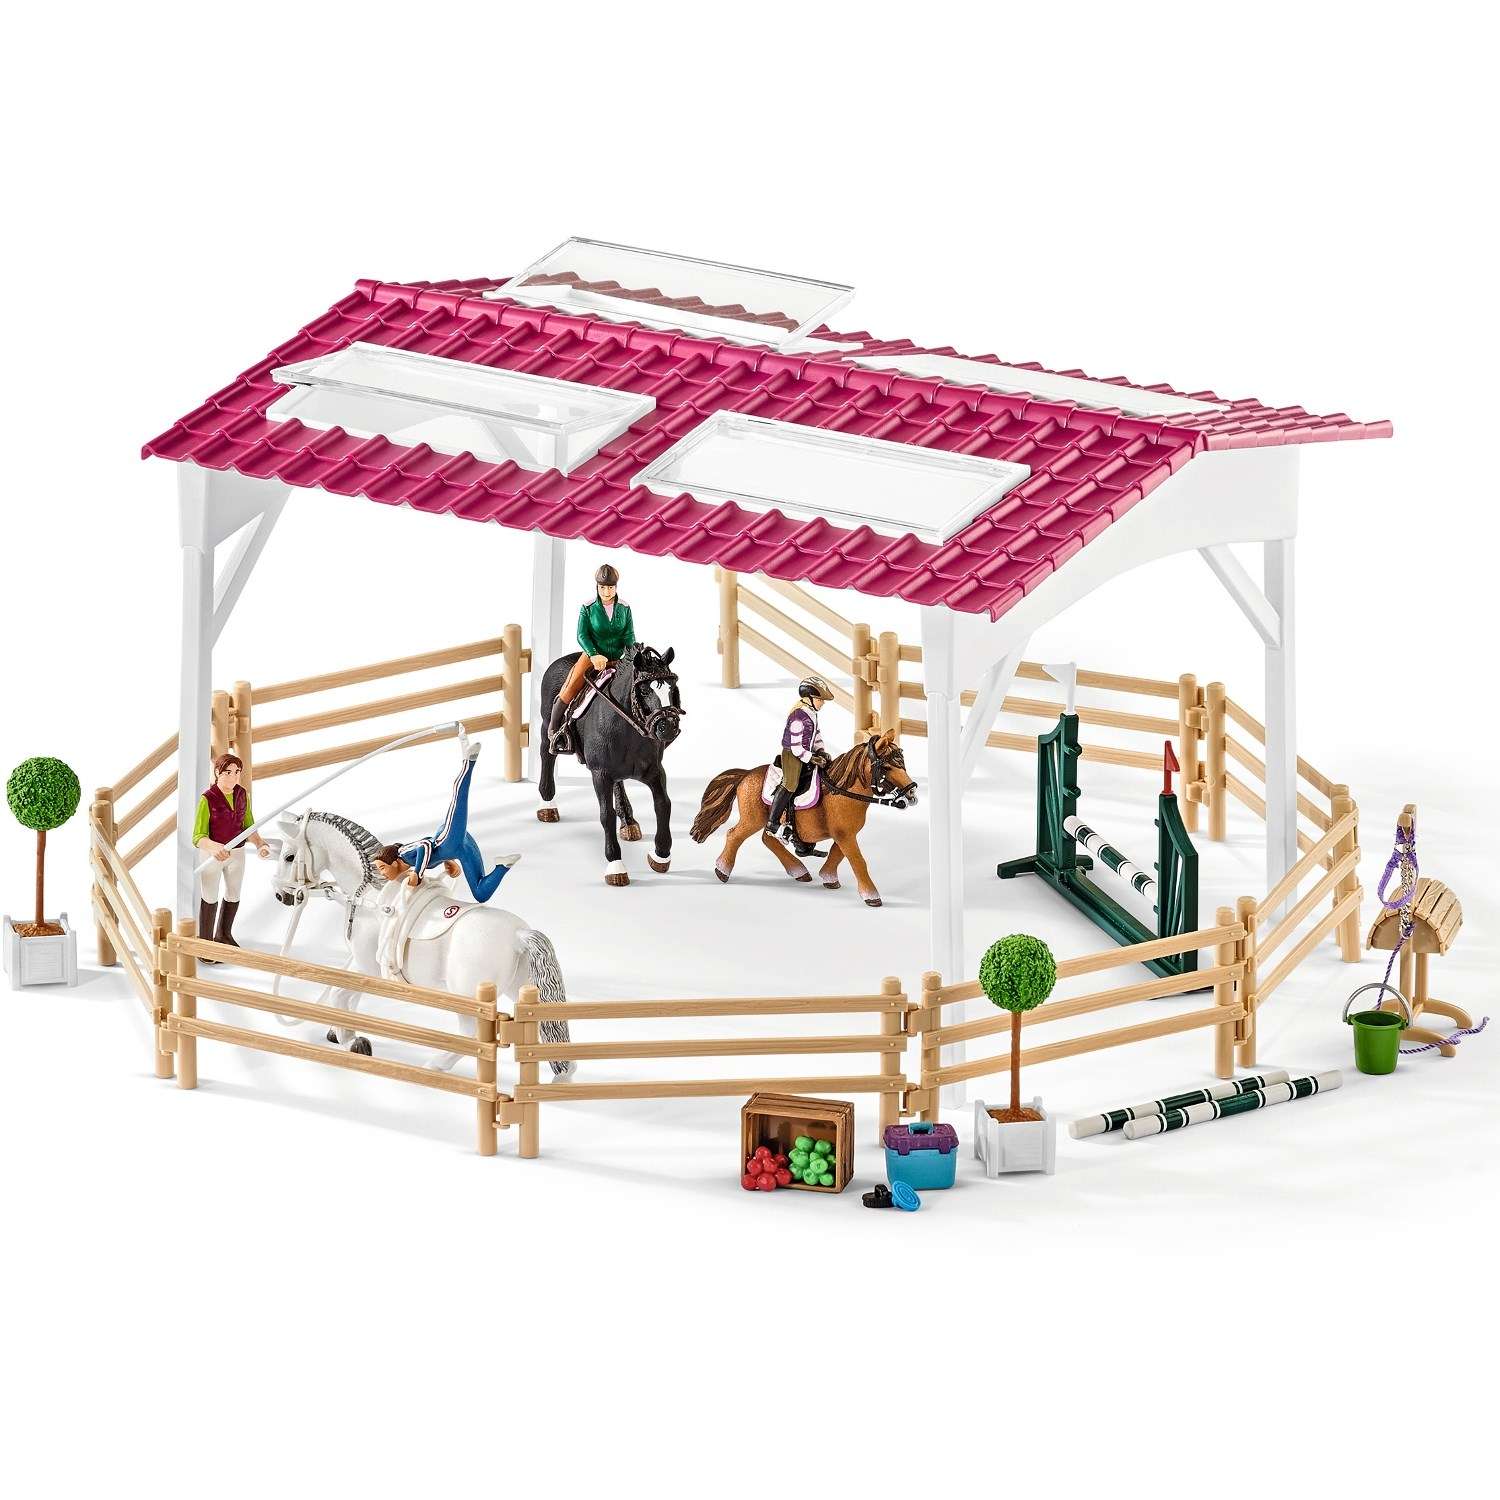 Schleich - Riding school with riders and horses (42389)